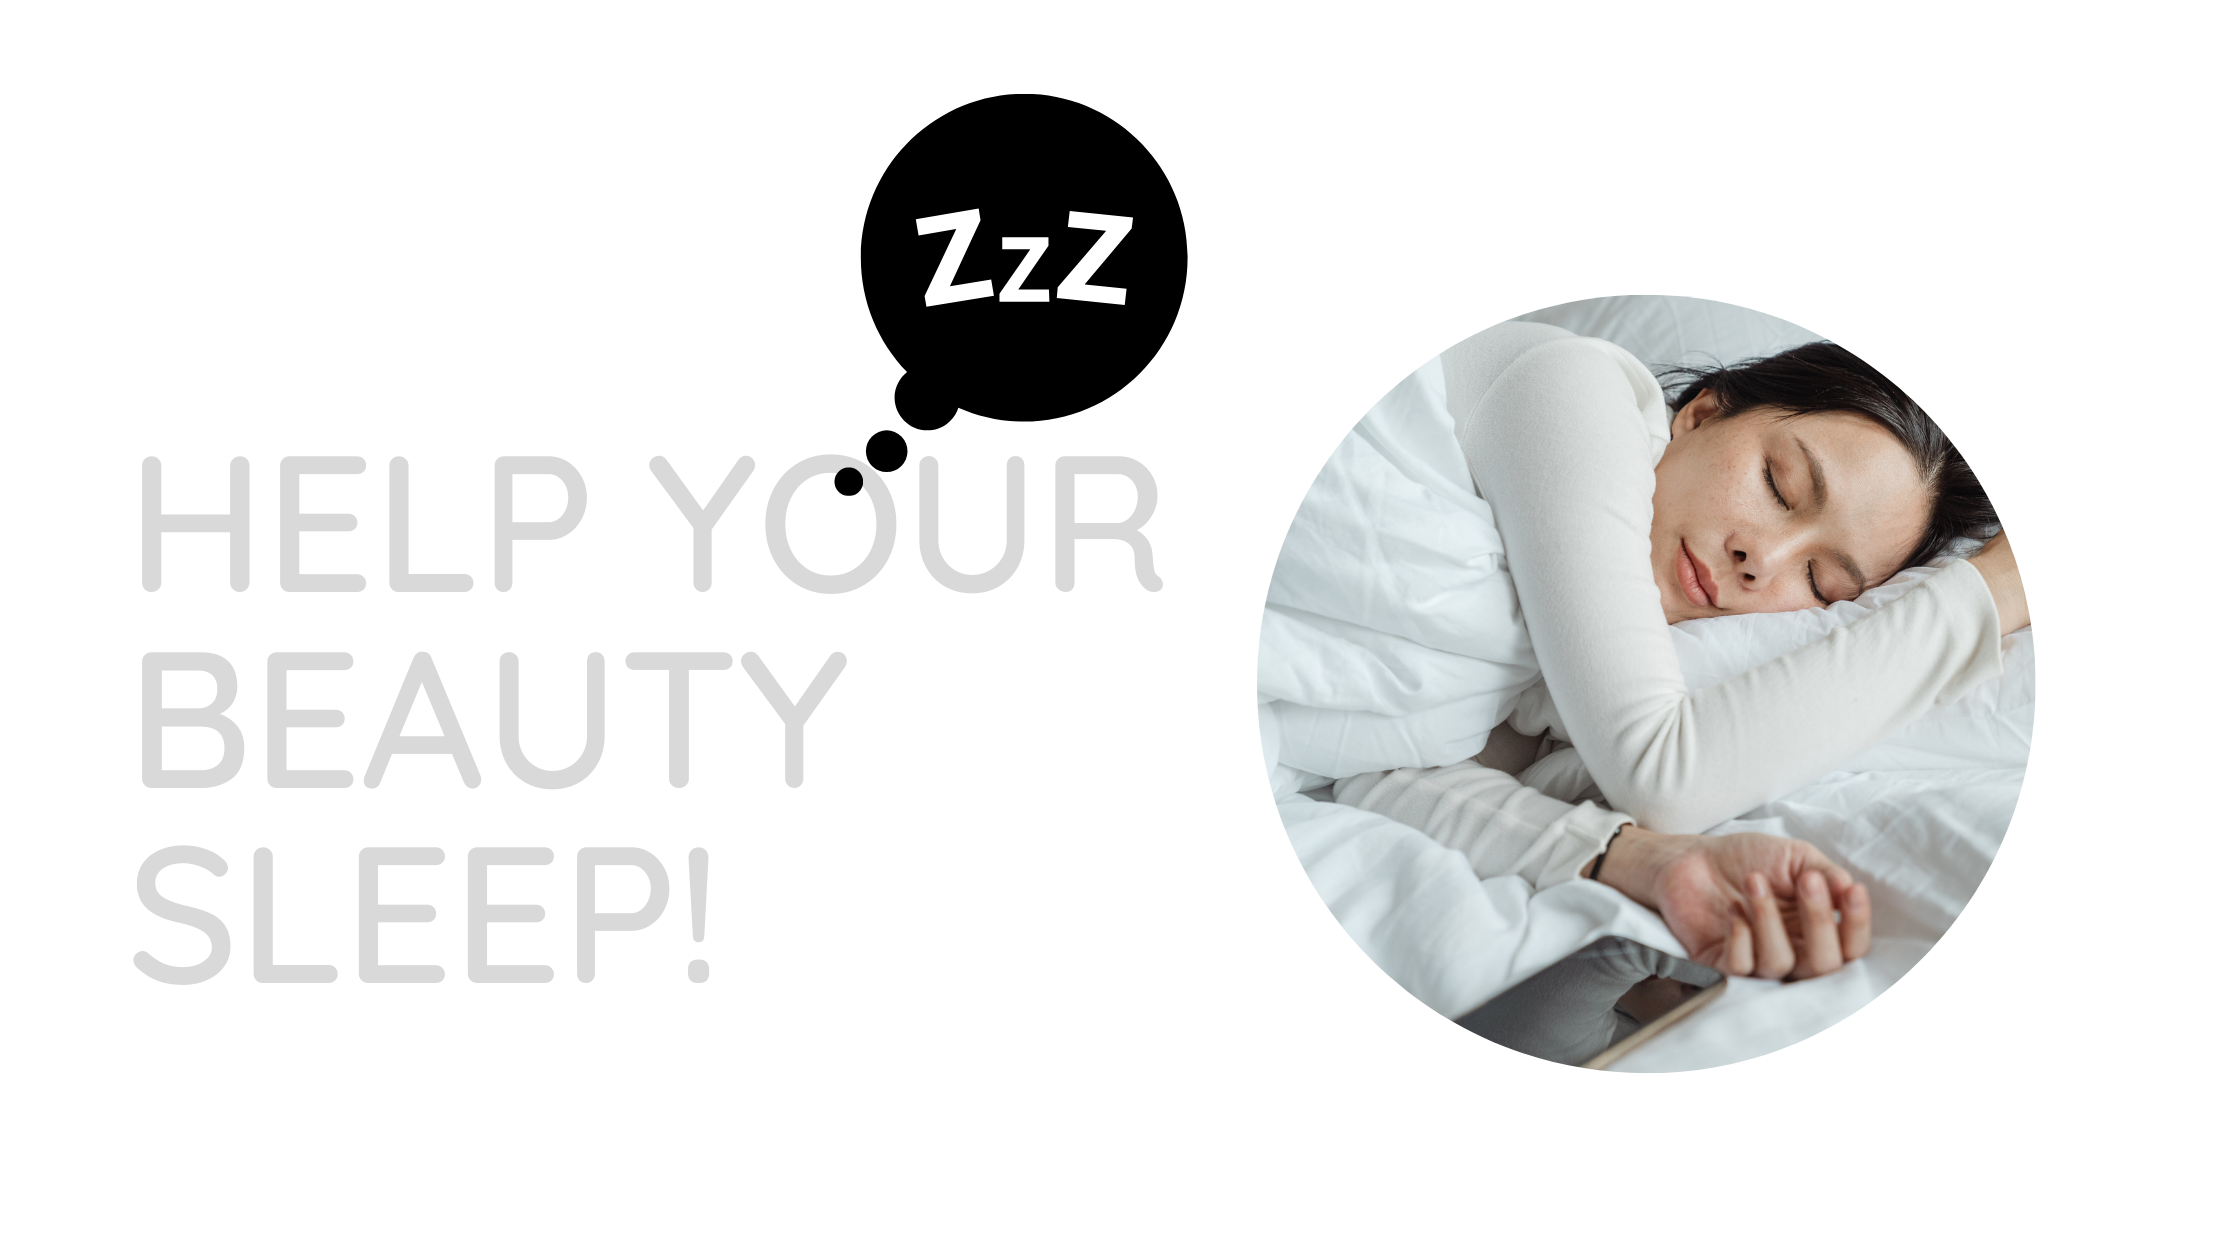 6 additions to your night routine that will help your beauty sleep!